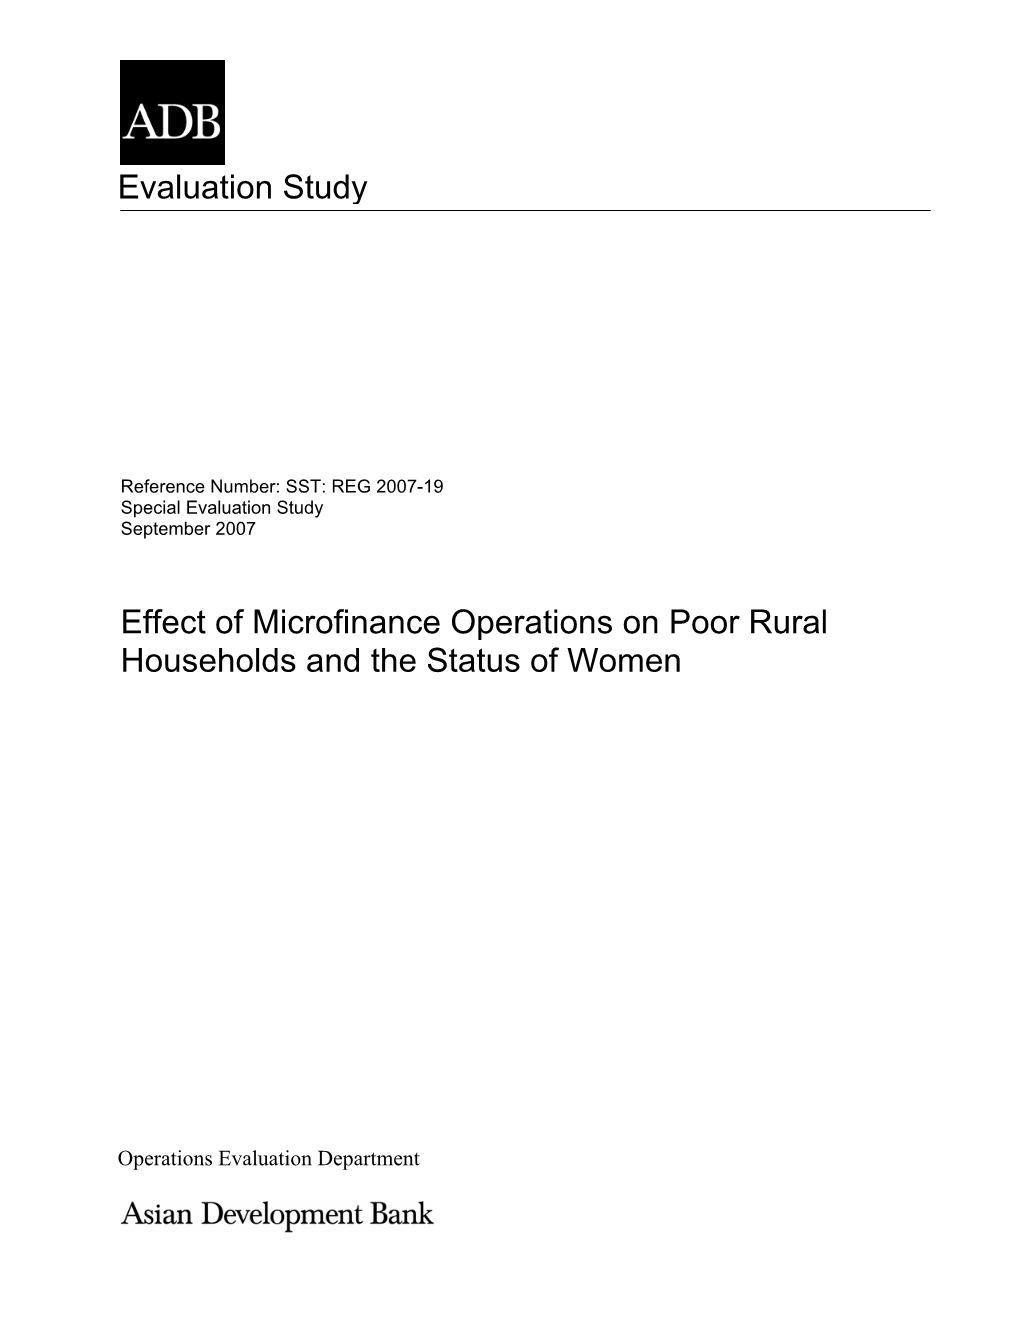 Evaluation on the Effect of Microfinance on Poor Rural